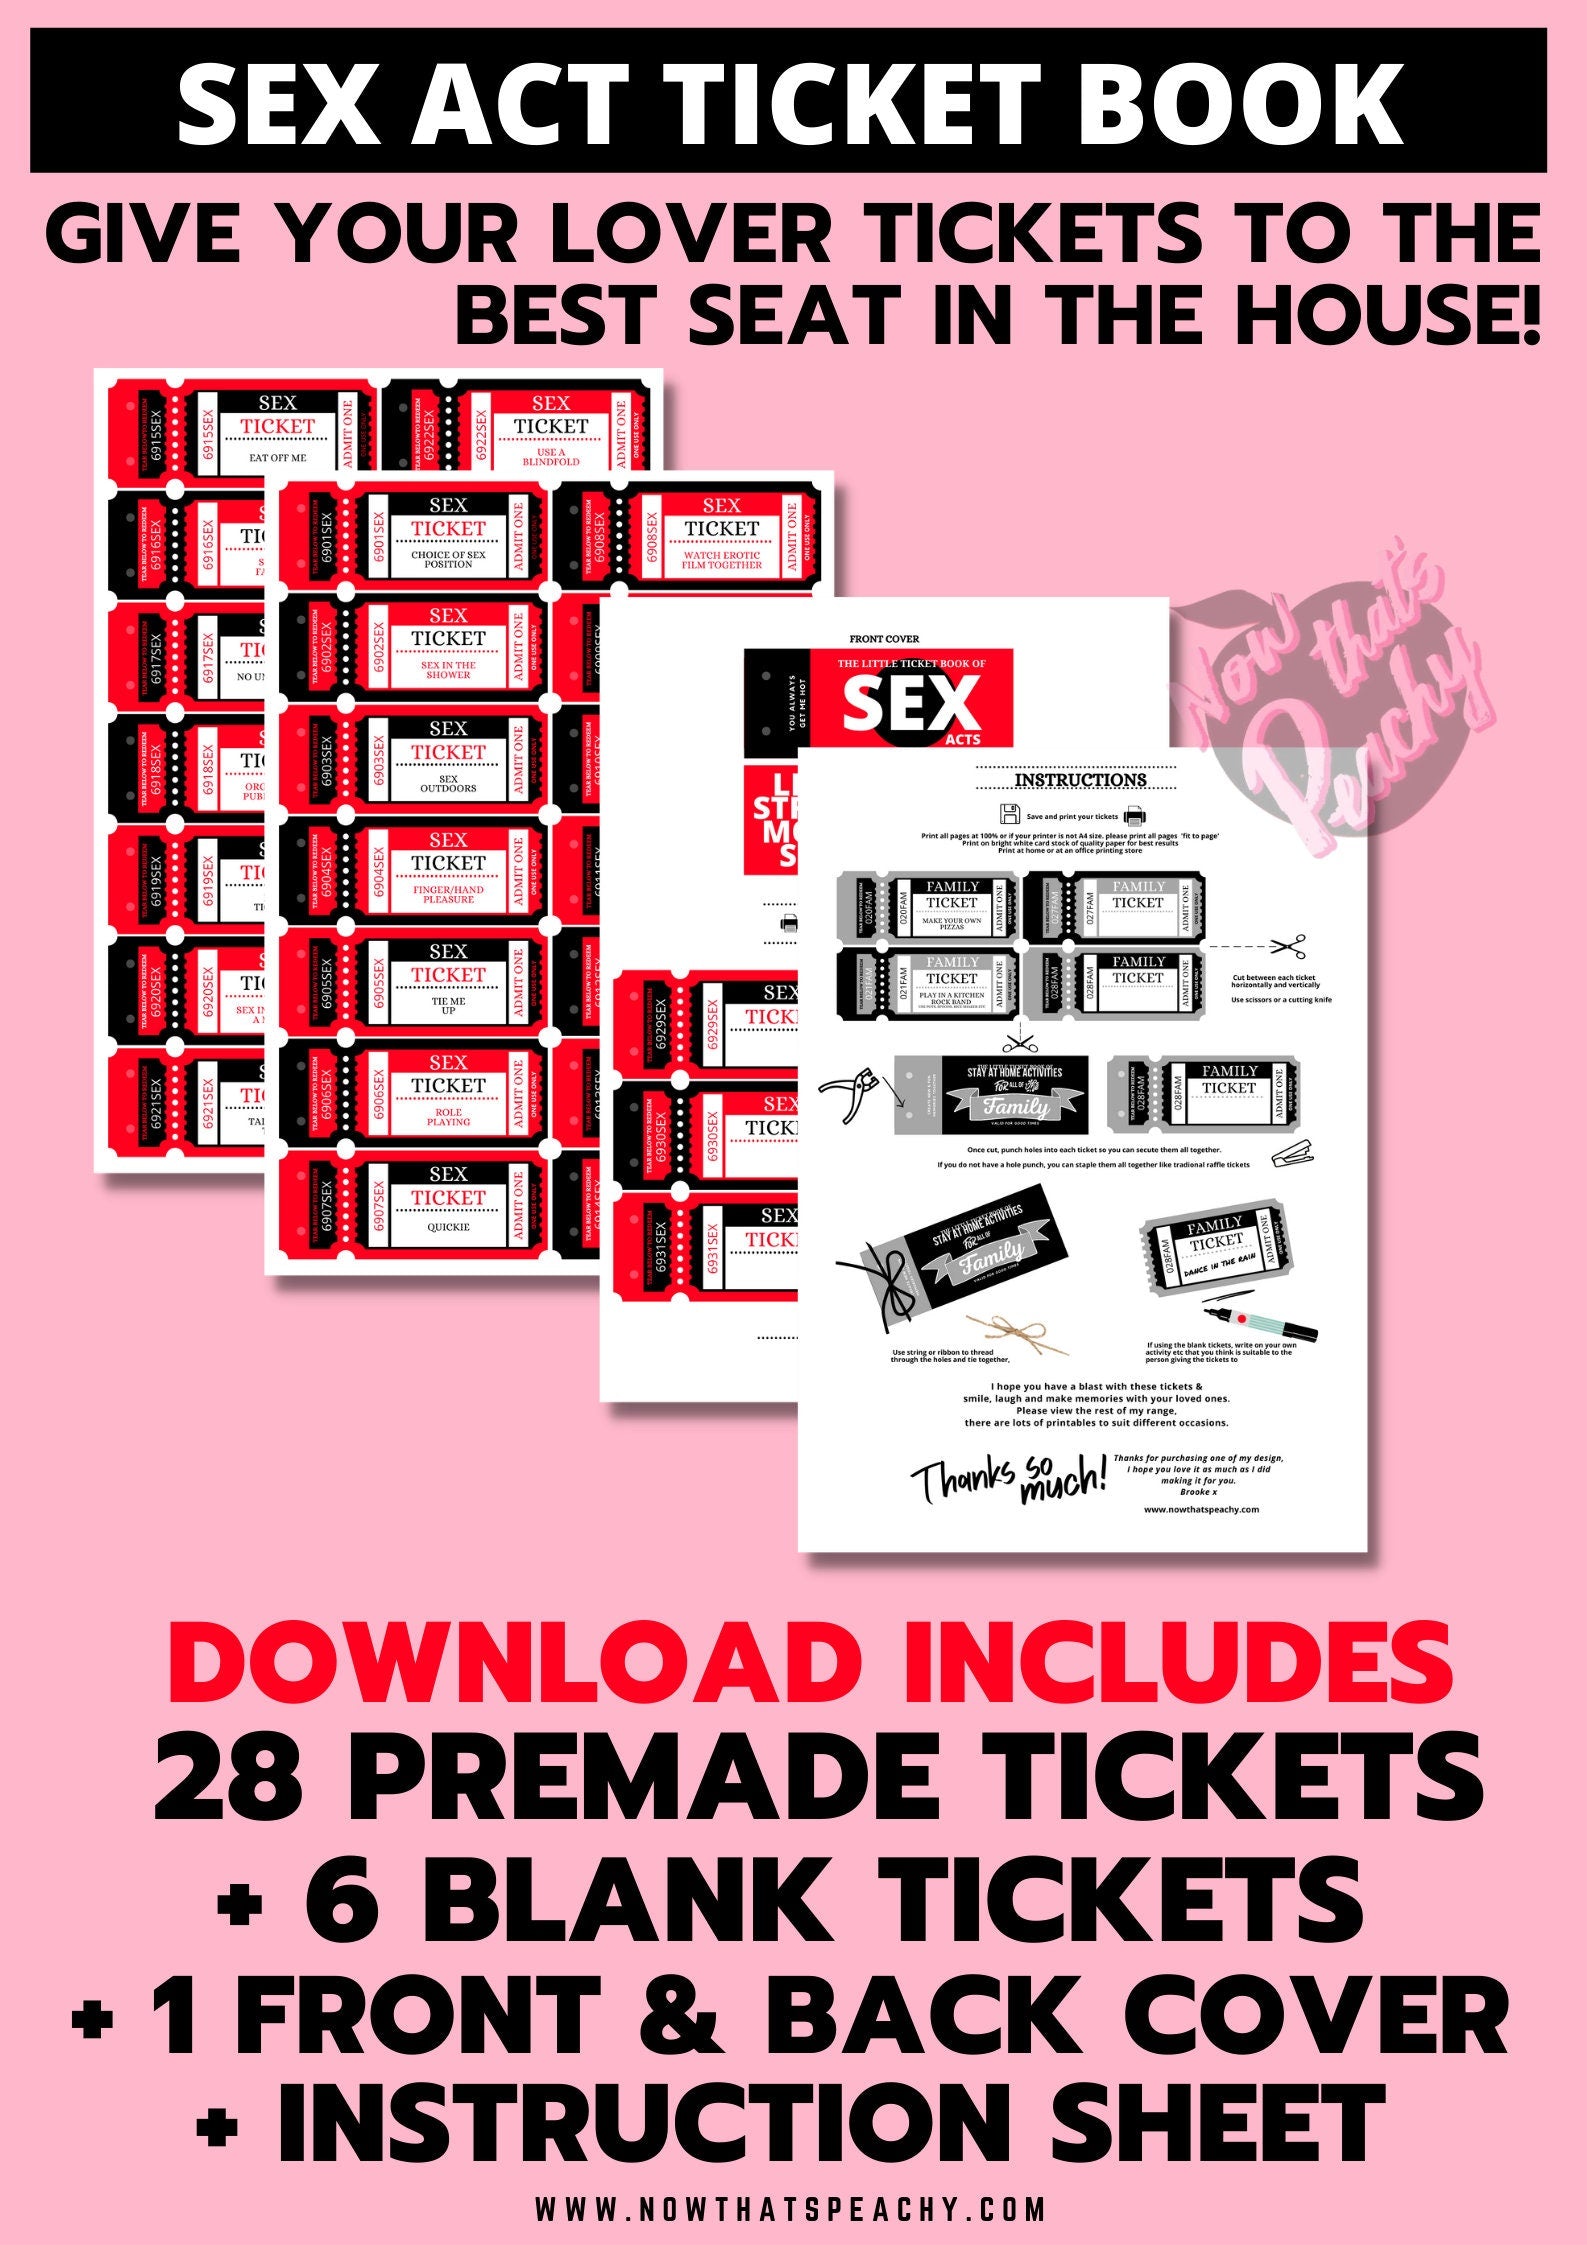 SEX Acts TICKET Voucher Book Printable Download Valentines Day Anniver pic image